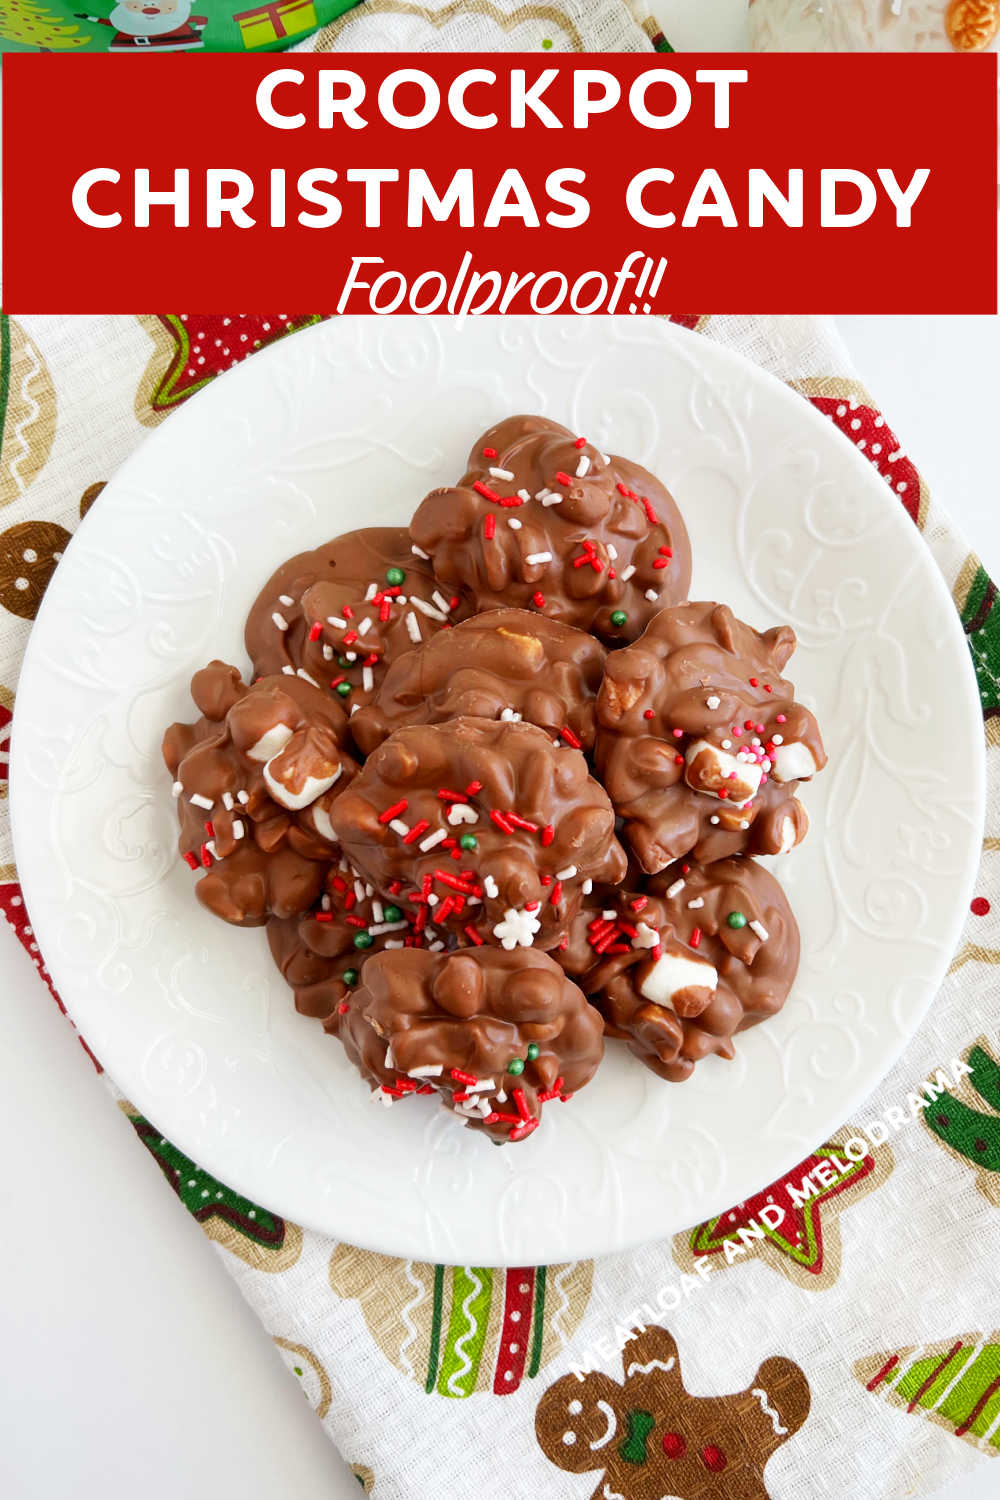 Crockpot Christmas Candy is an easy no bake treat made with peanuts and chocolate in the slow cooker. This crockpot candy recipe is foolproof and perfect for the holiday season. via @meamel